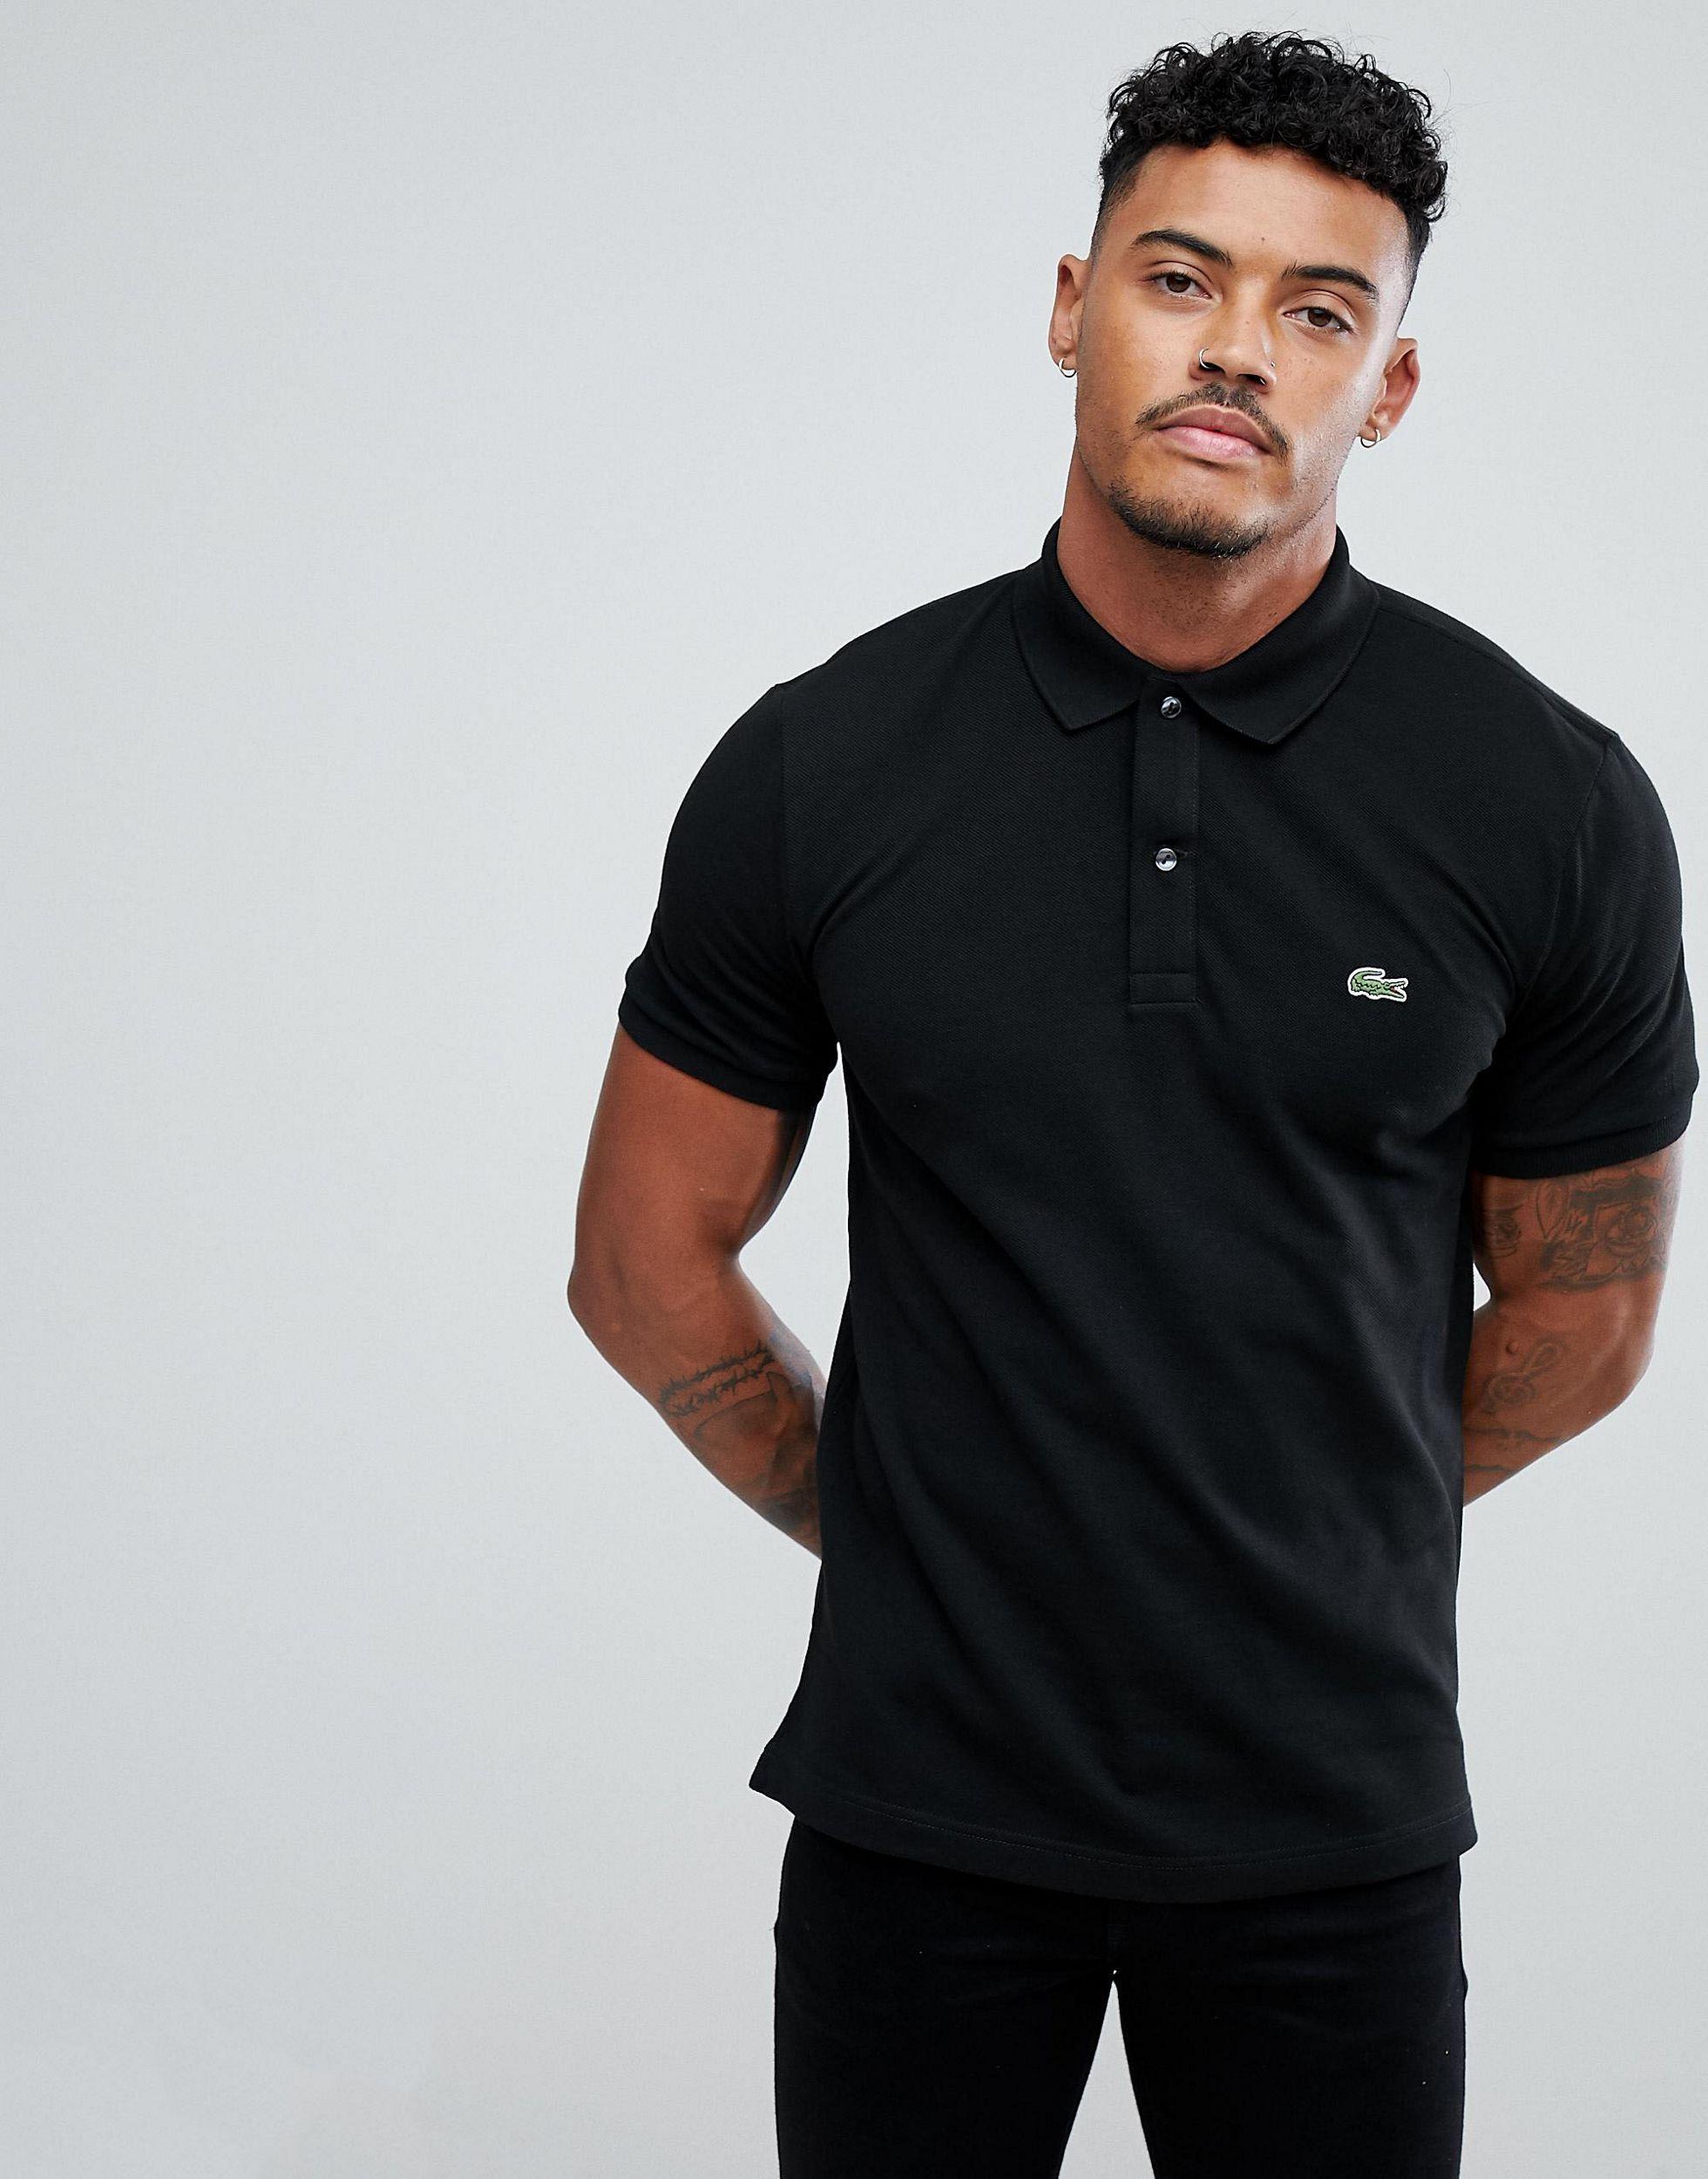 Lacoste Slim Fit Pique Polo in Black for Men - Lyst